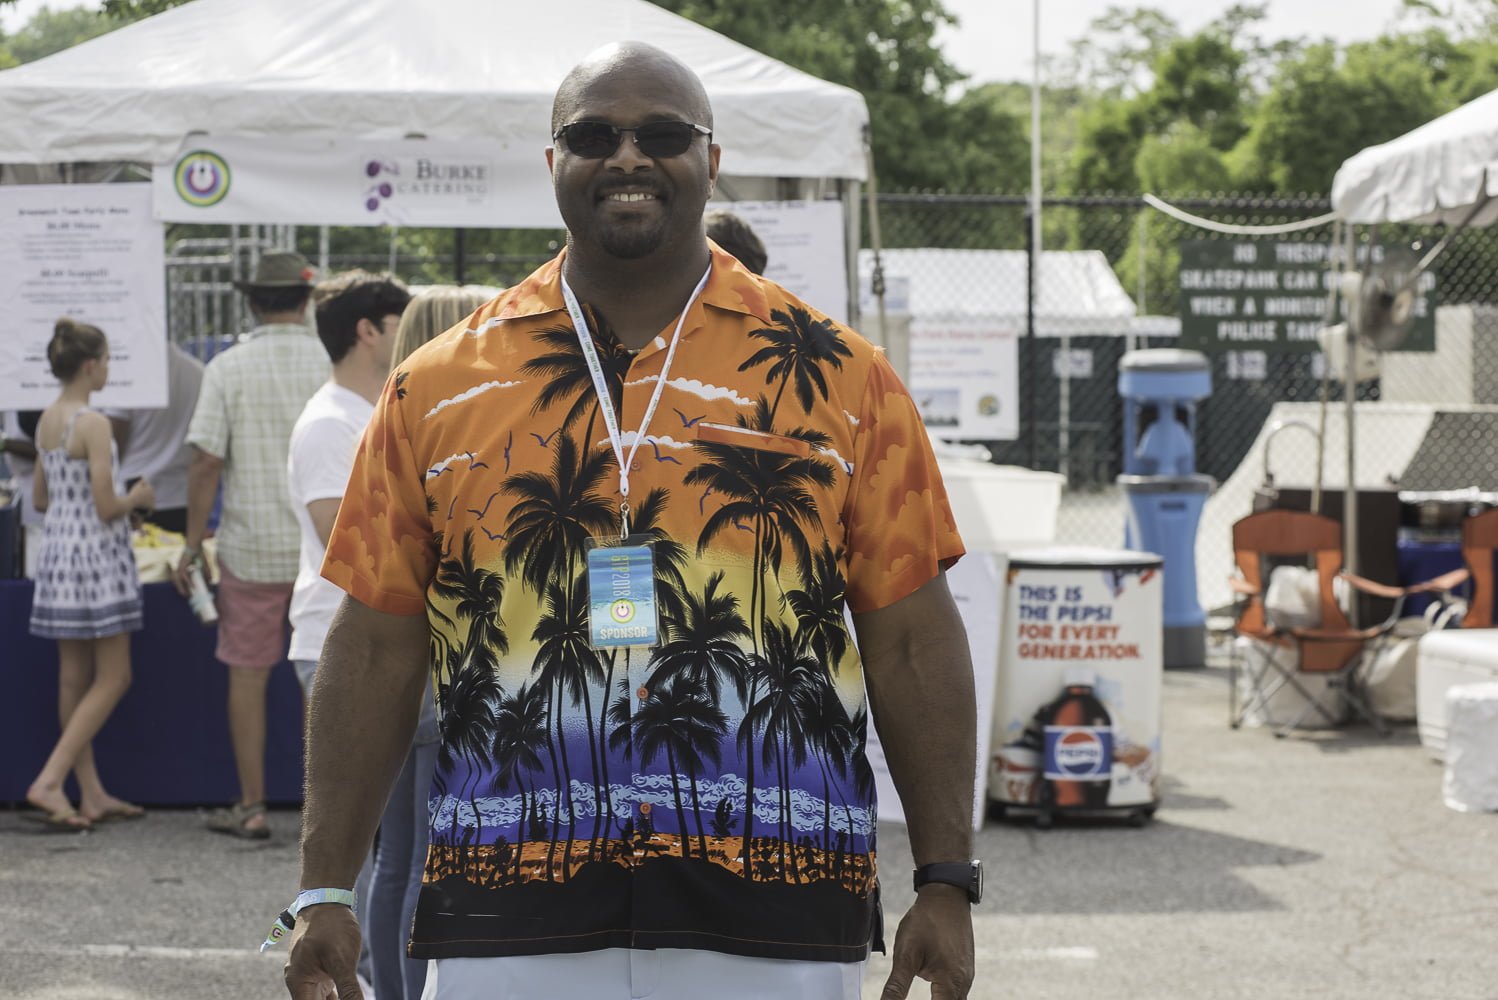 Bobby Walker from the Boys & Girls Club of Greenwich at Greenwich Town Party, May 26, 2018 Photo: Asher Almonacy